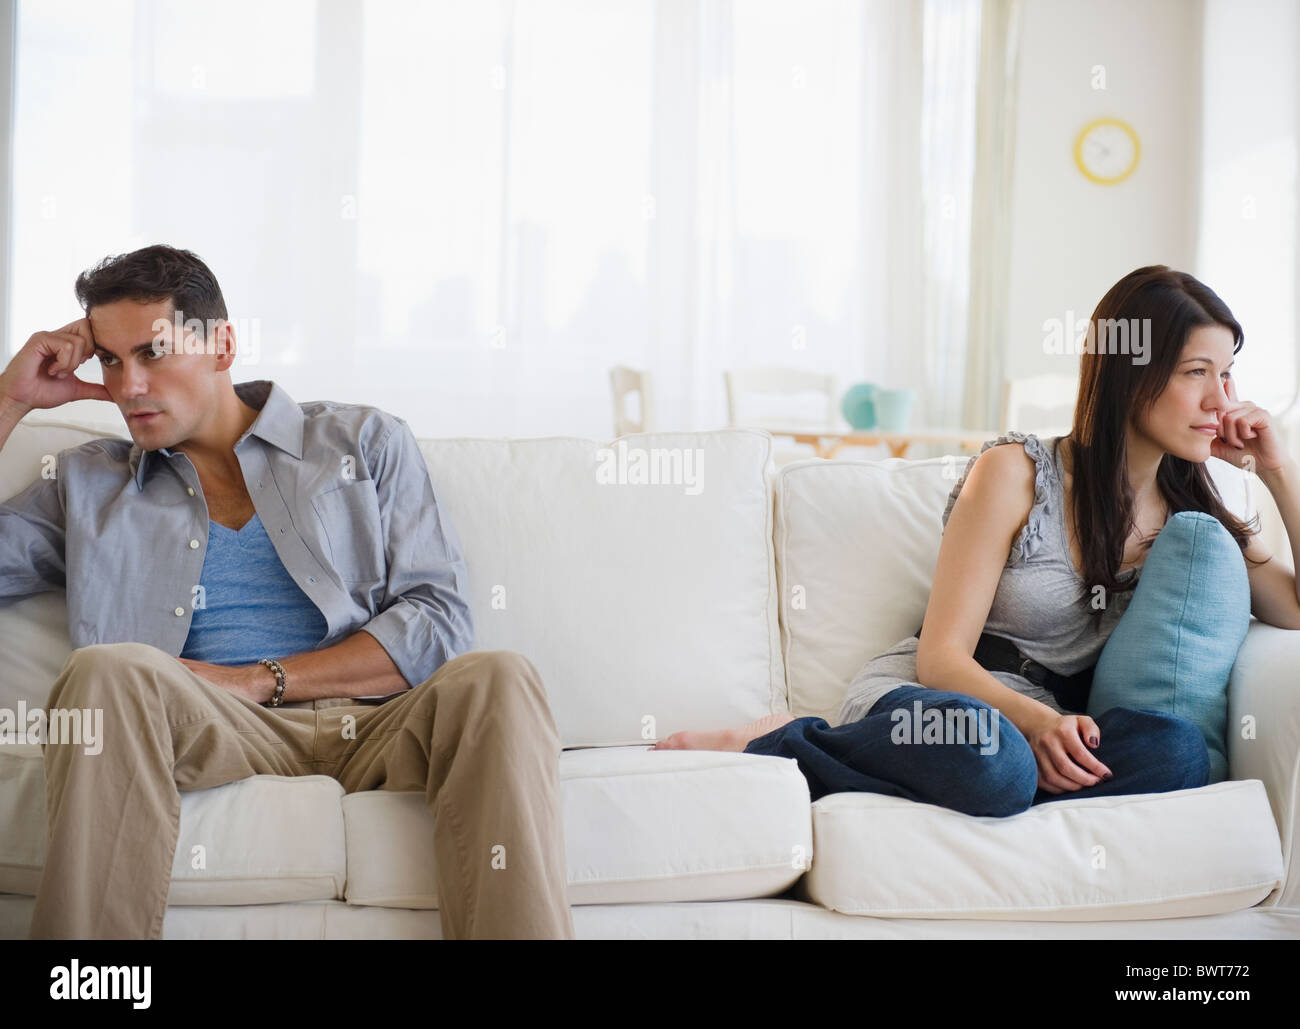 Angry mixed race couple having argument on sofa Stock Photo